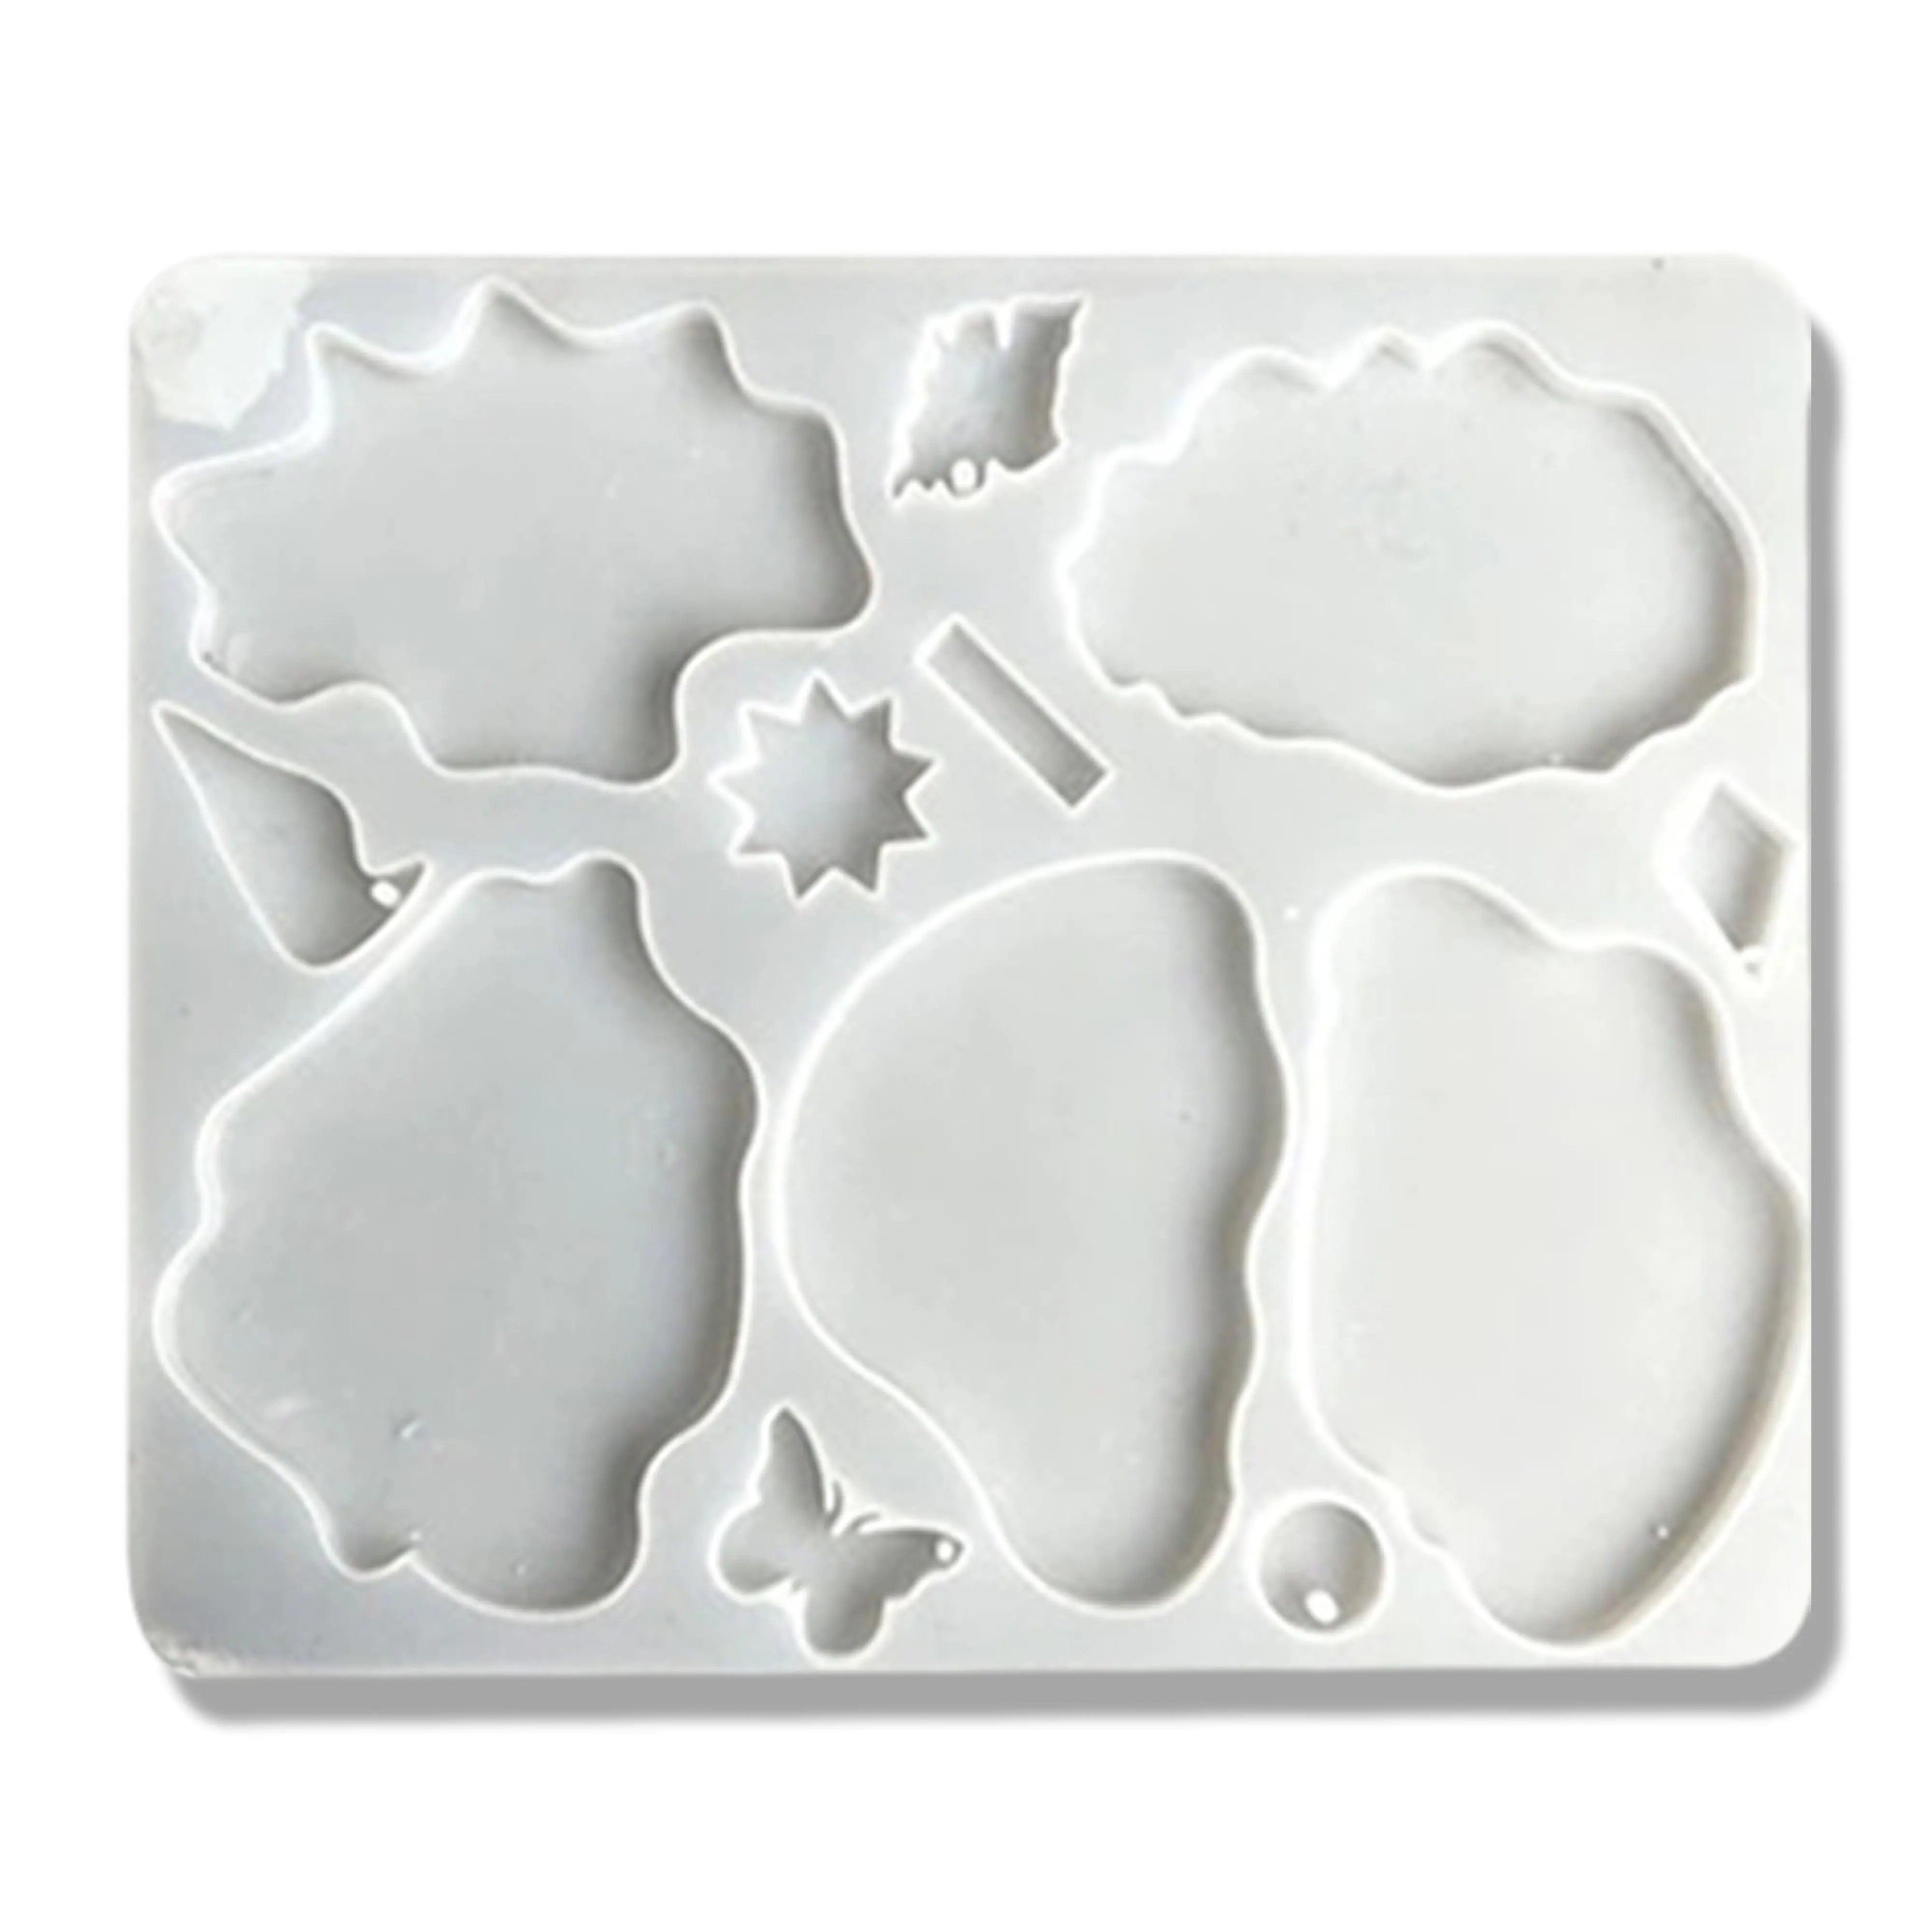 12 Mix Shape Resin Mold The Stationers